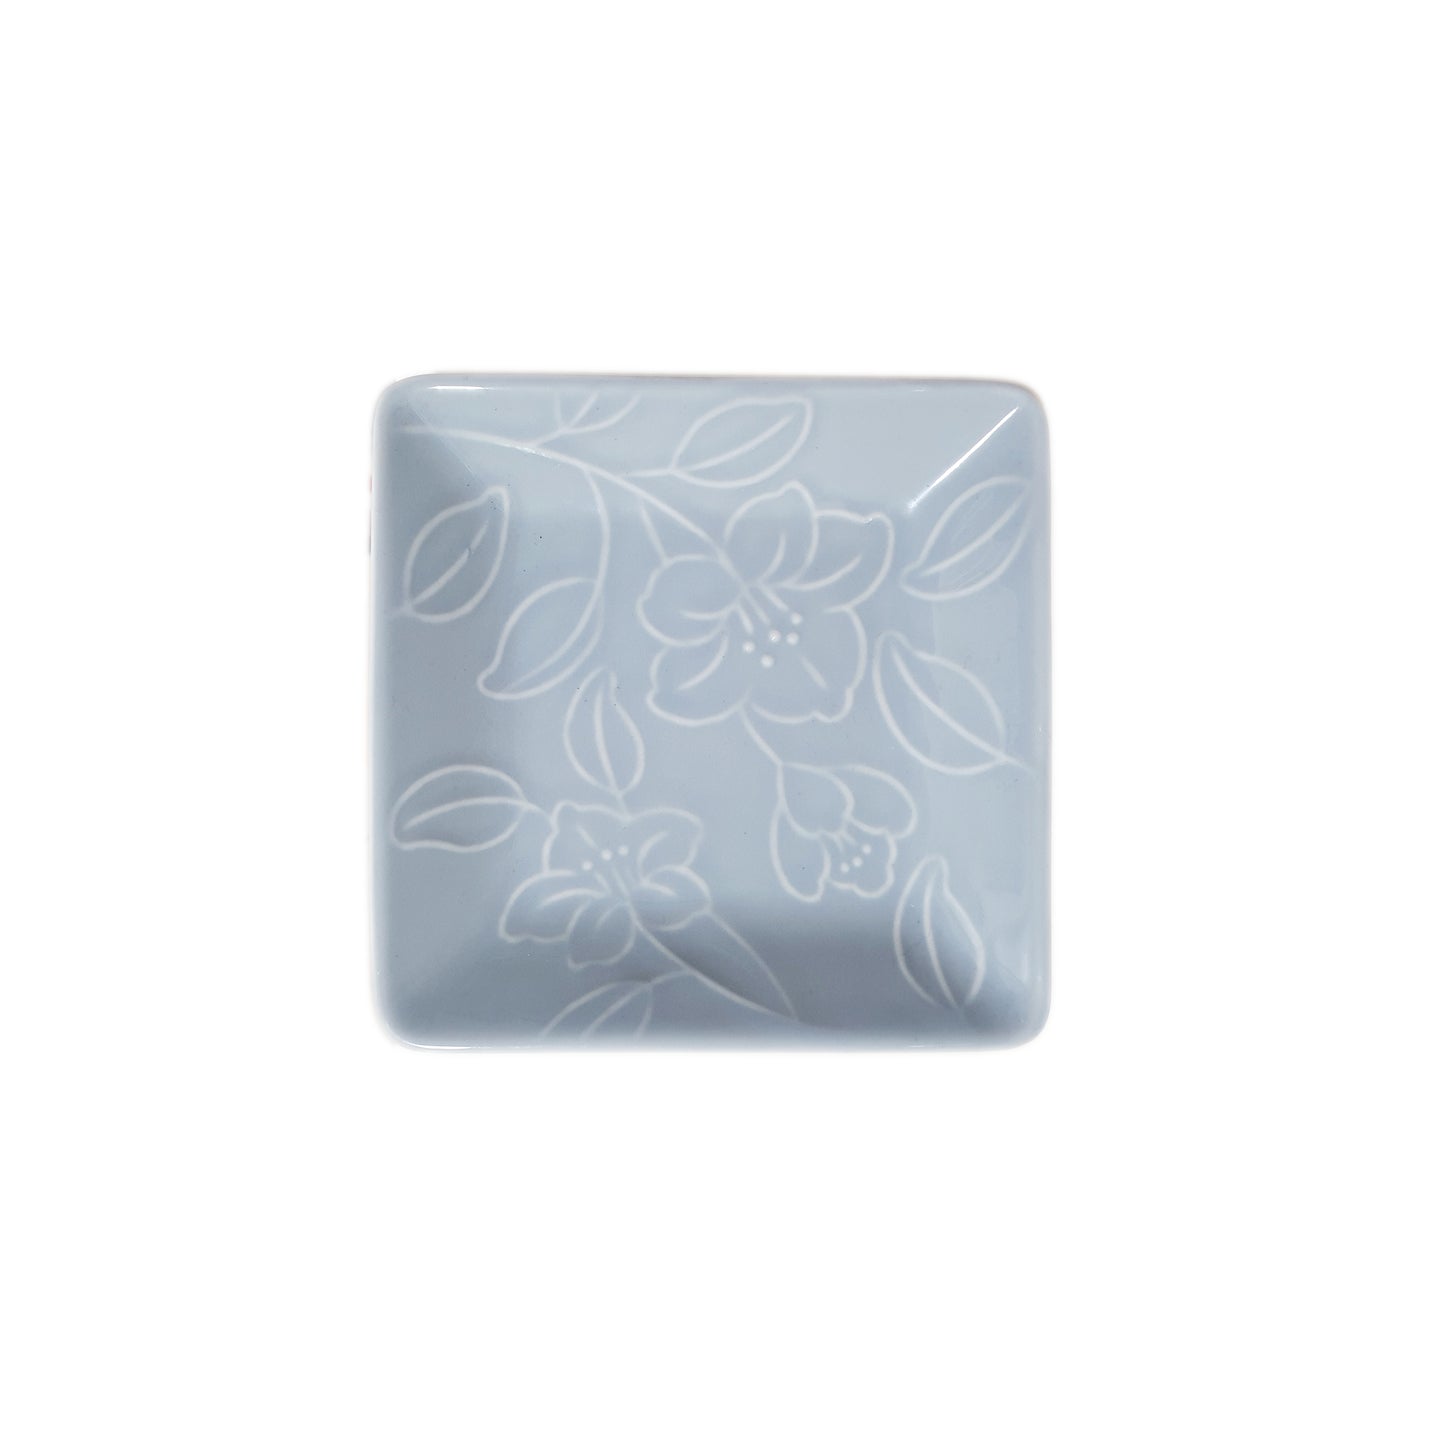 Refreshing Square Plate 127mm 2P Set (Sky Blue Color) 𝟮 𝗣𝗹𝘂𝘀 𝟮